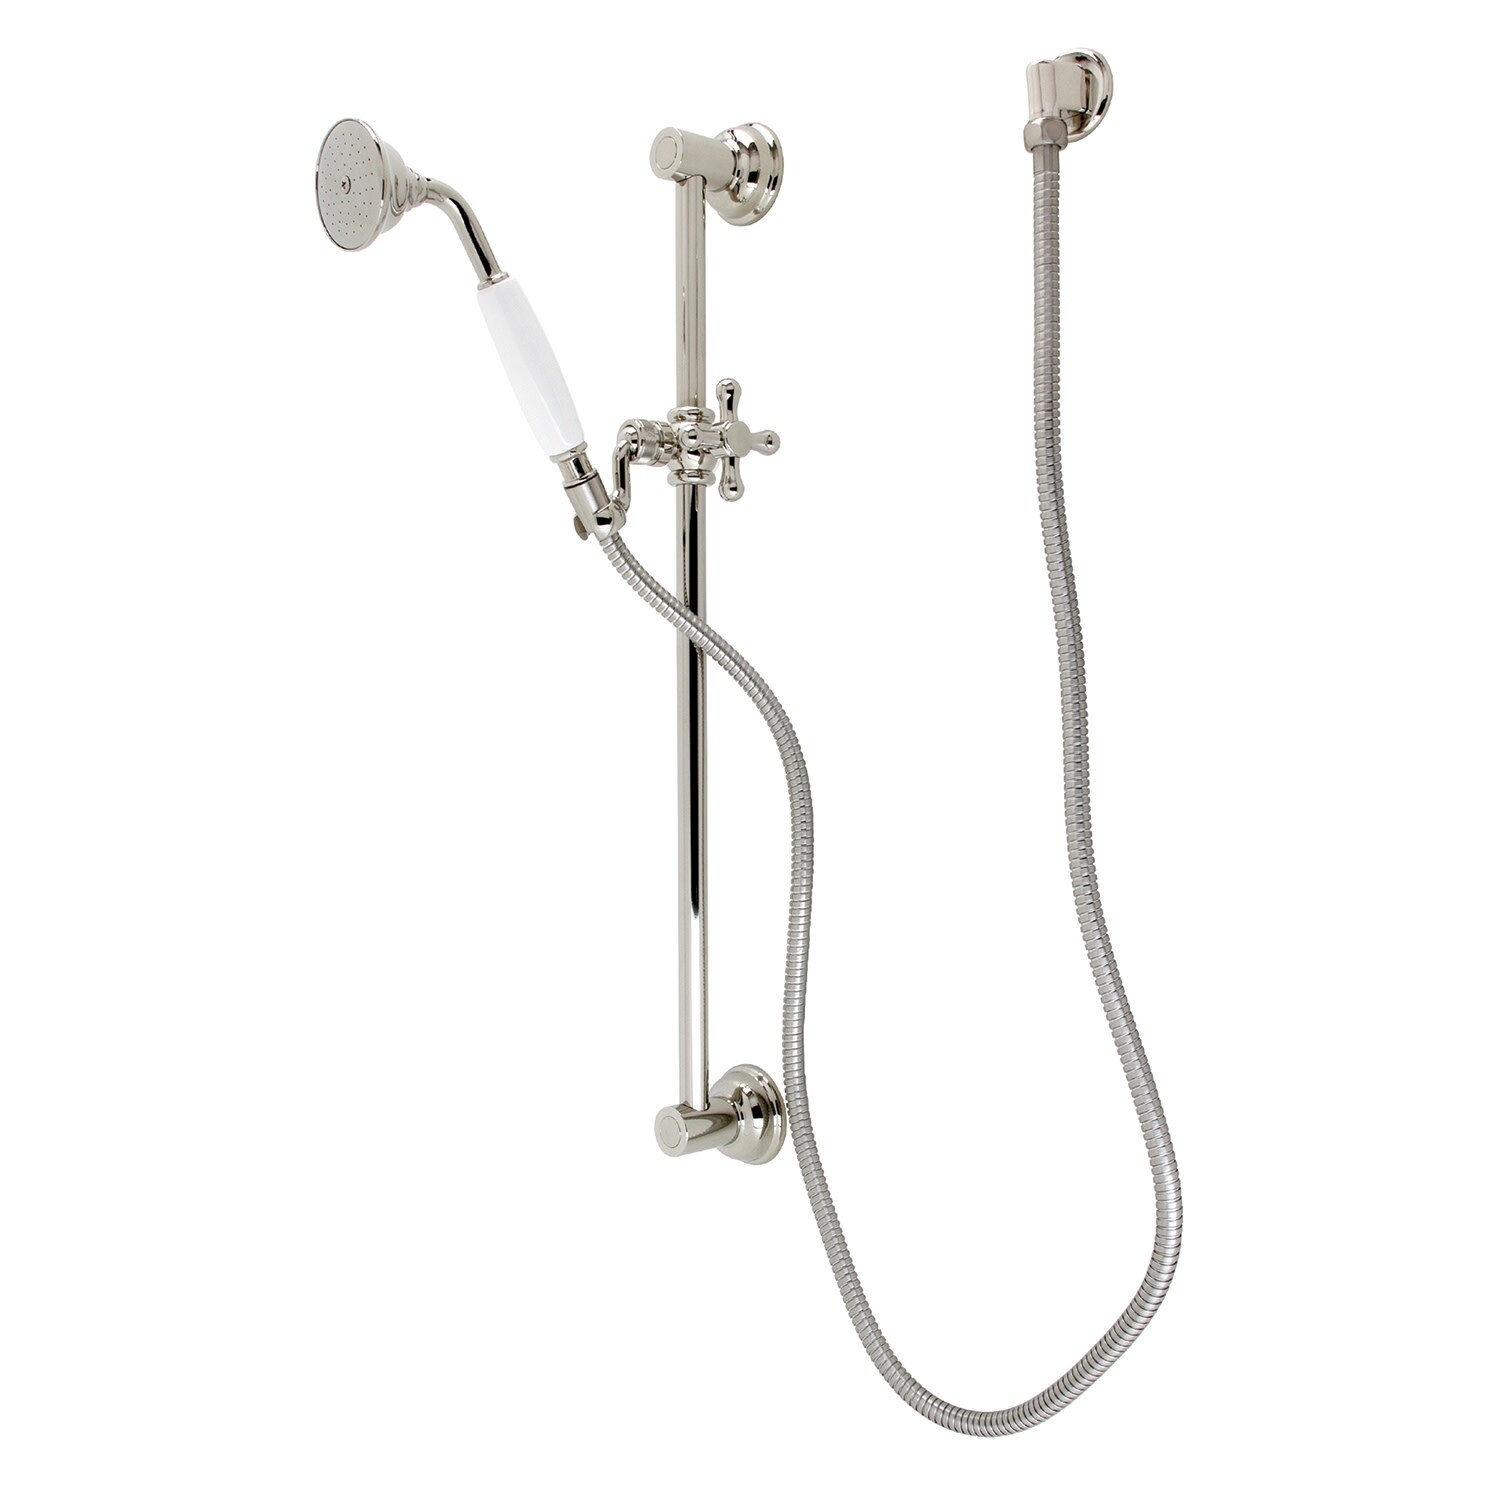 Kingston Brass Made To Match Shower System with Hand Shower, Slide